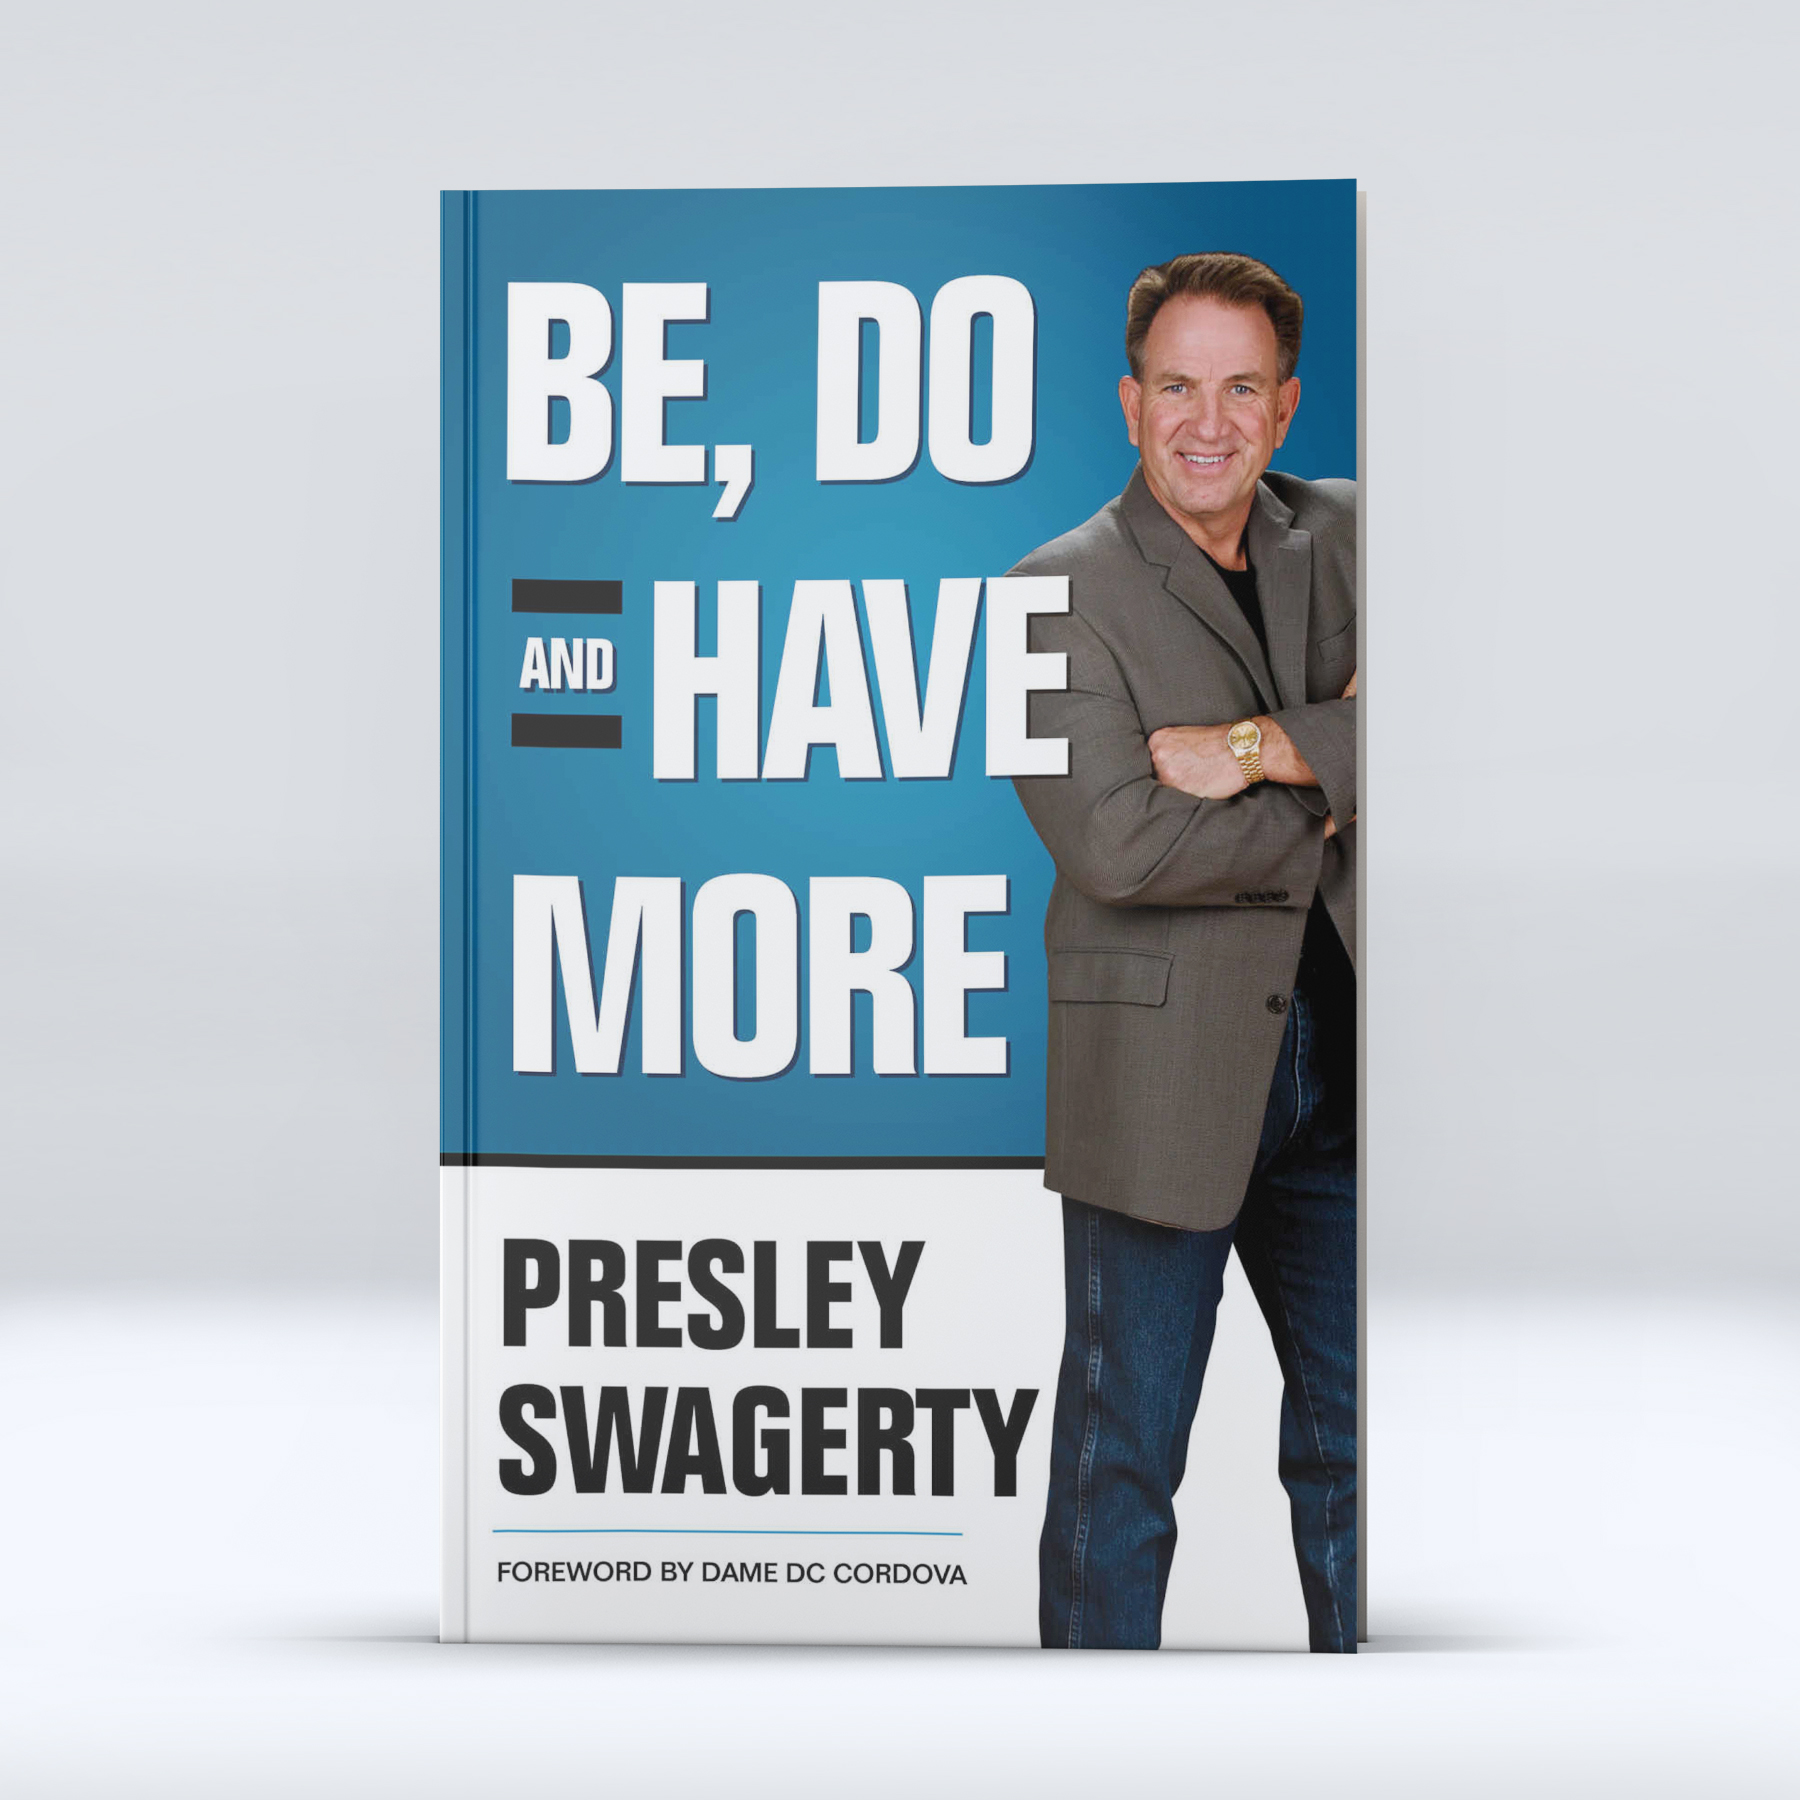 Photo of Be Do and Have More book cover by Presley Swagerty